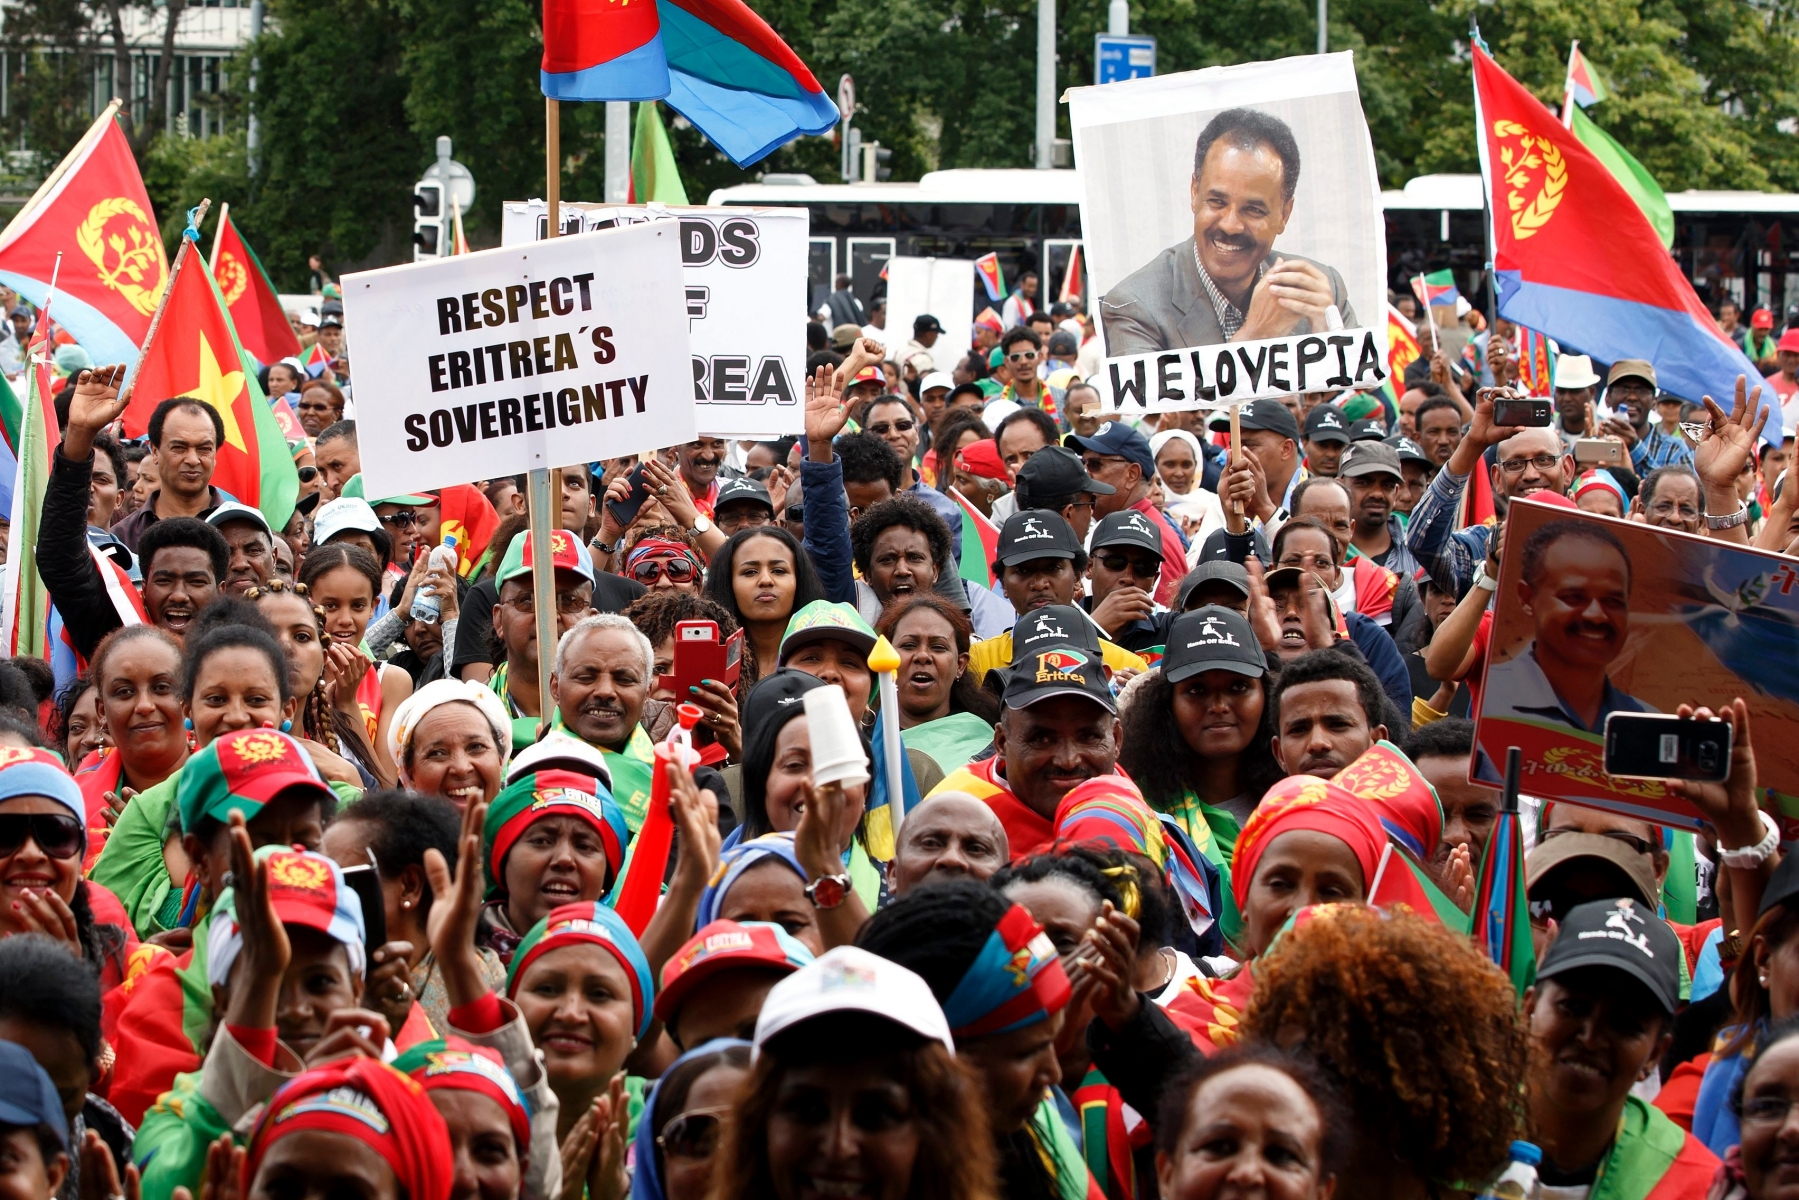 Supporters Eritrea's government protest against the U.N., during a rally on the Place des Nations, in front of the European headquarters of the United Nations in Geneva, Switzerland, Tuesday, June 21, 2016. "Stop" to want "regime change" in Eritrea. Several thousand citizens of this country protested Tuesday at the Place des Nations against the UN and the conclusions of the Commission on Eritrea. (KEYSTONE/Salvatore Di Nolfi) SWITZERLAND ERITREA DEMONSTRATION